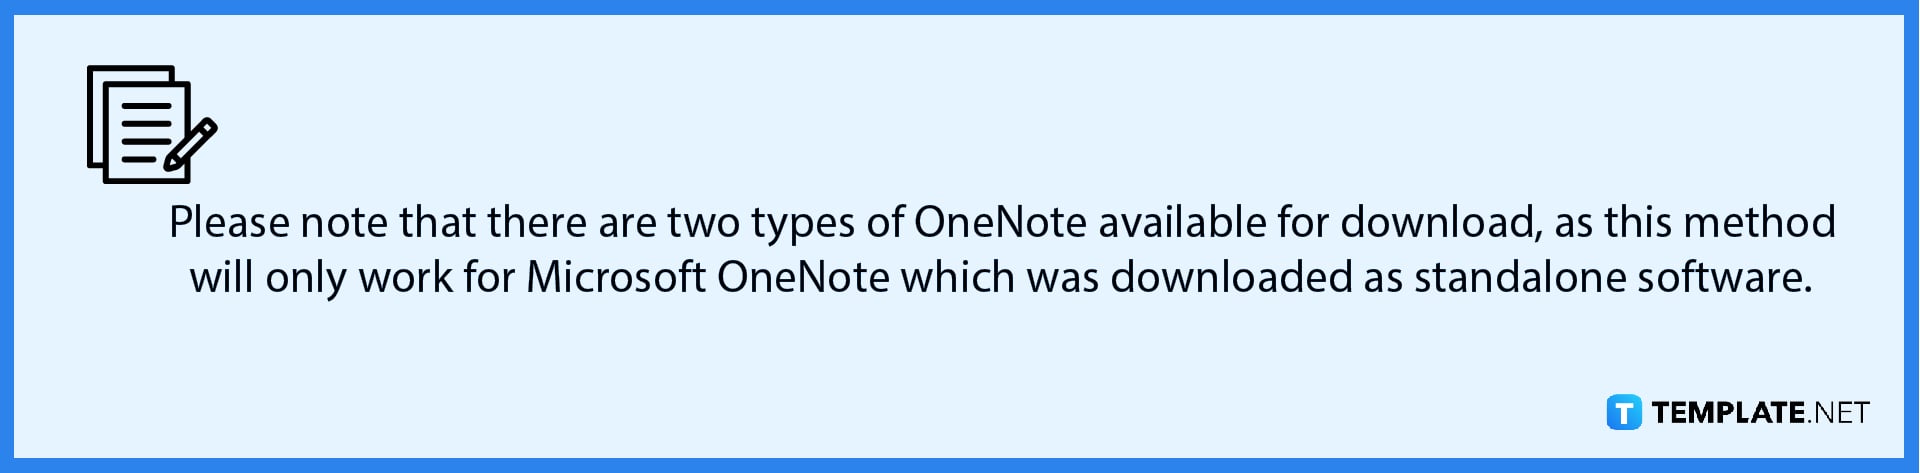 how-to-convert-microsoft-onenote-to-word-note-2